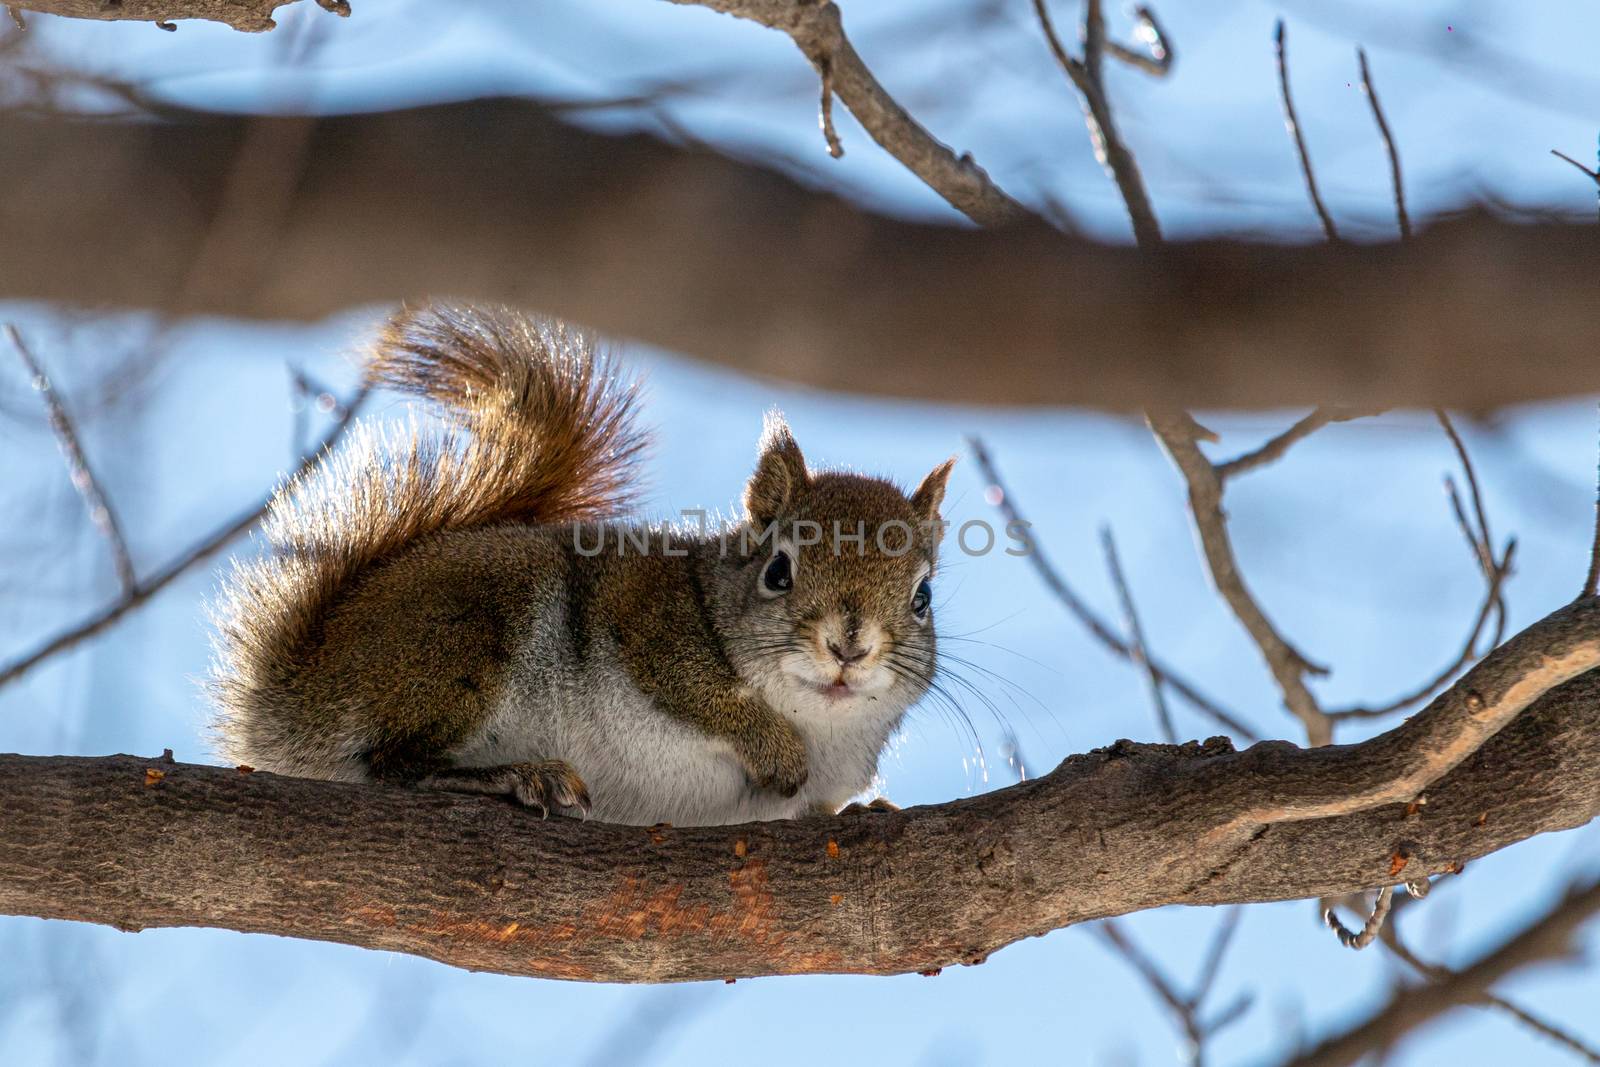 Red tree squirrel through the branches against sky by colintemple